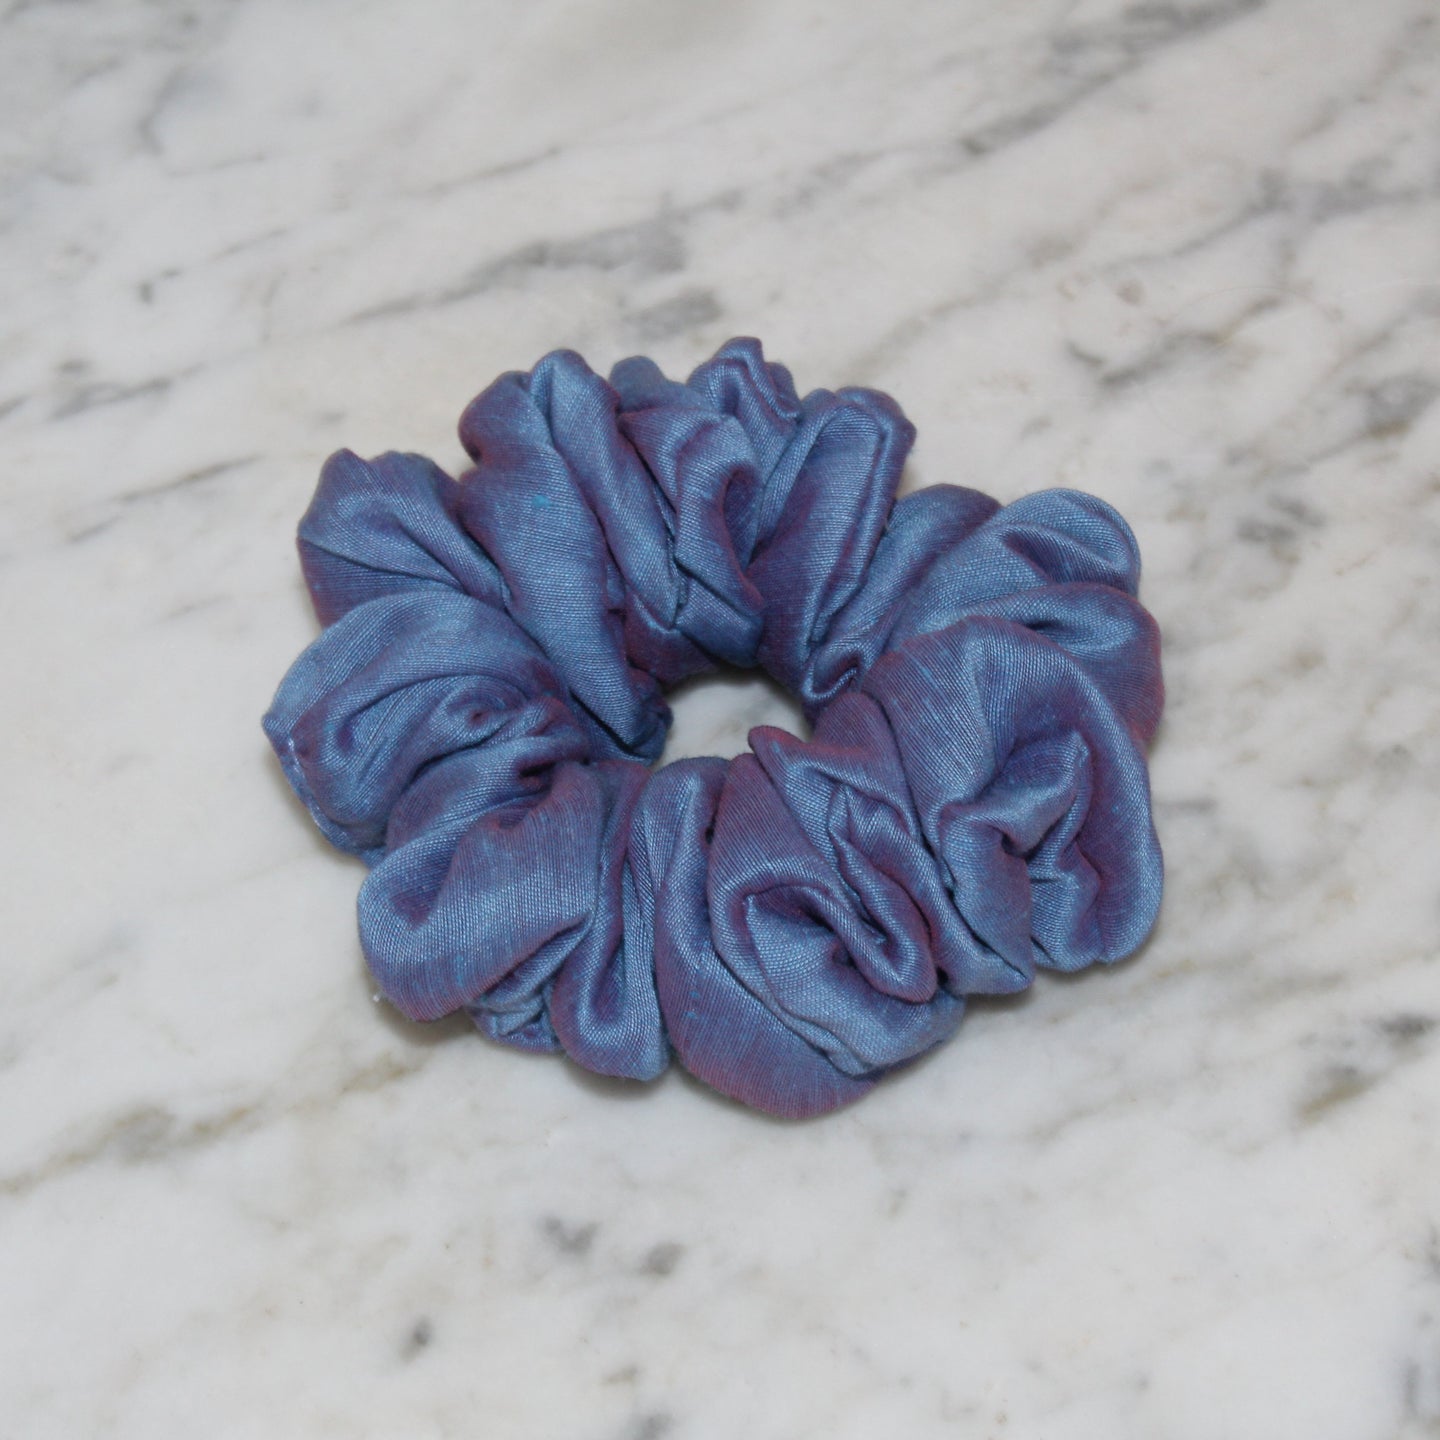 Scrunchie handmade by YV, made of blue/turquoise vintage textile (extra small)